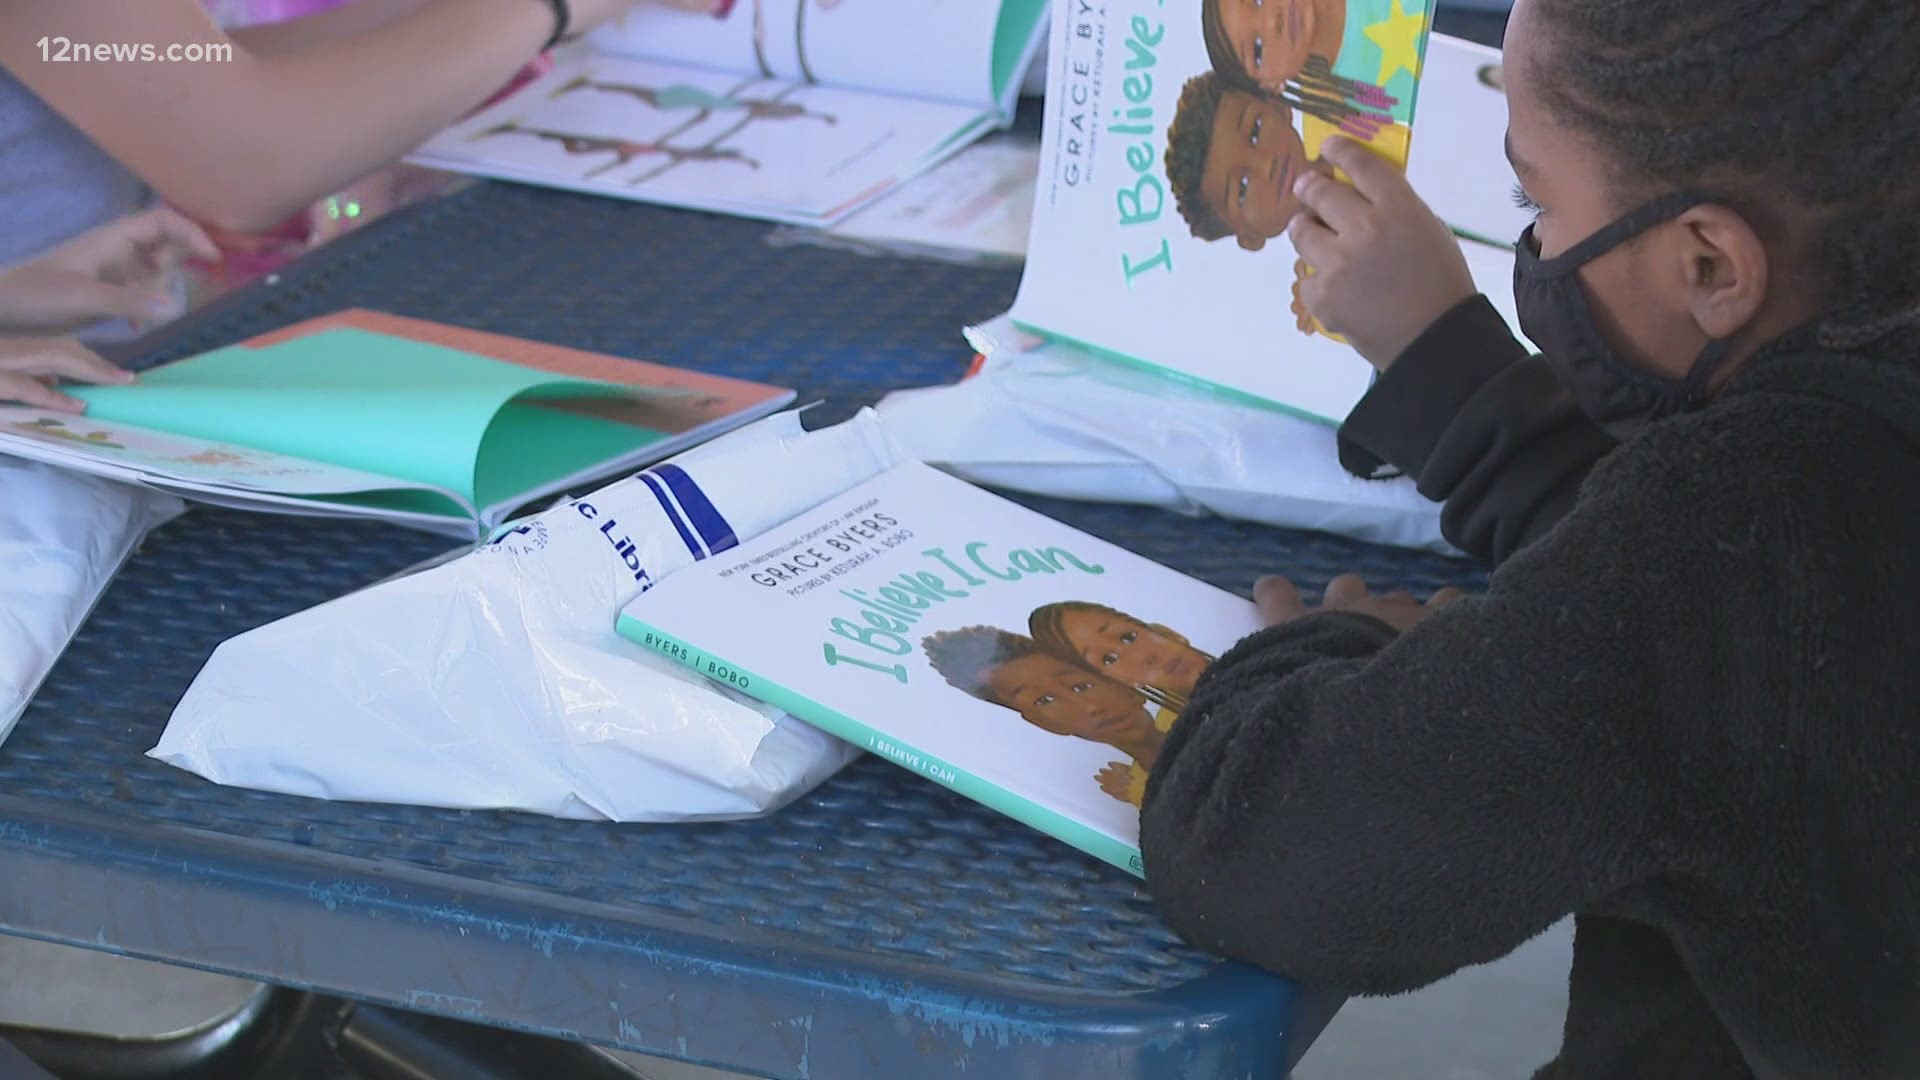 To celebrate Black History Month, the City of Tempe hosted a read-along event. Organizers say it's a good way to pass along the importance of Black History Month.